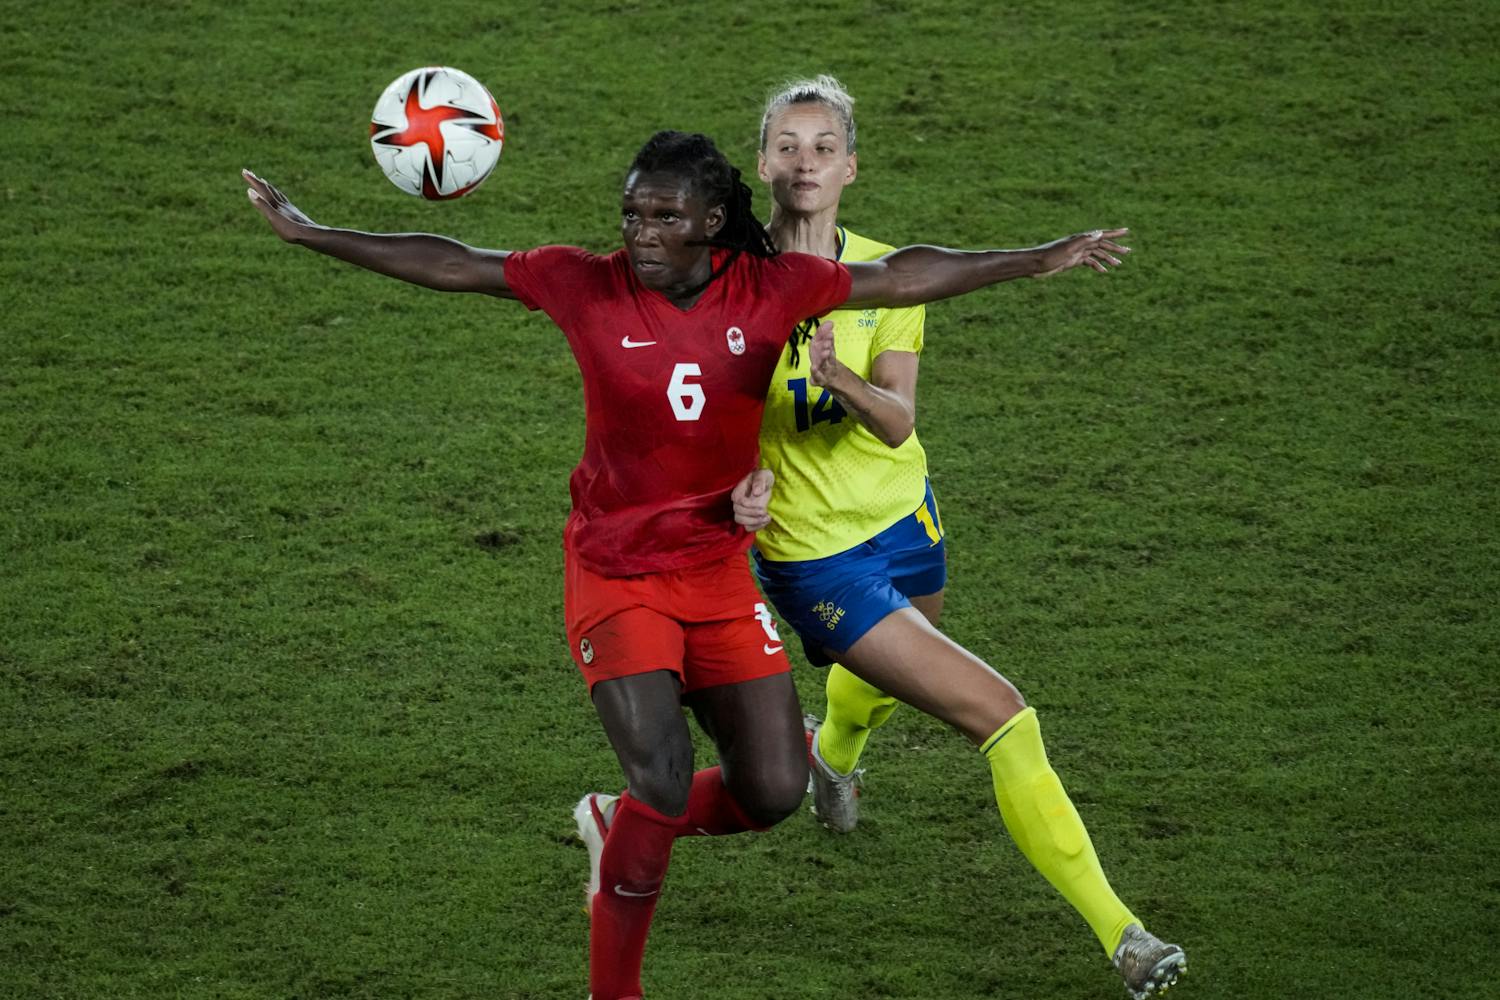 Canada's Deanne Rose duels for the ball with Sweden's Nathalie Bjorn during the women's final soccer match at the 2020 Summer Olympics, Friday, Aug. 6, 2021, in Yokohama, Japan. (AP Photo/Kiichiro Sato)